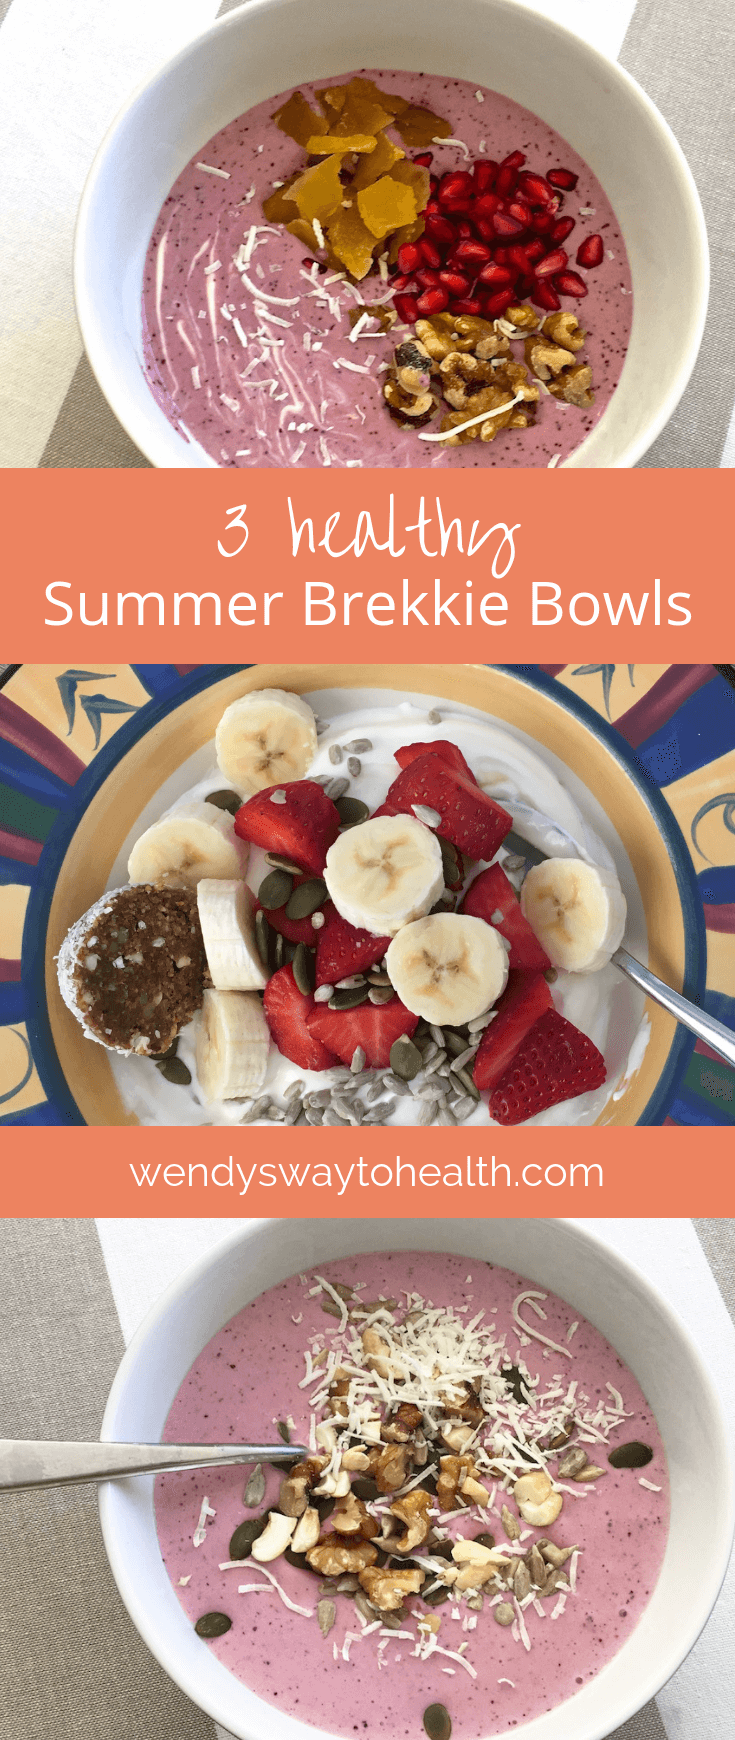 Wendy's Way healthy summer brekkie bowls are the perfect way to start the day!